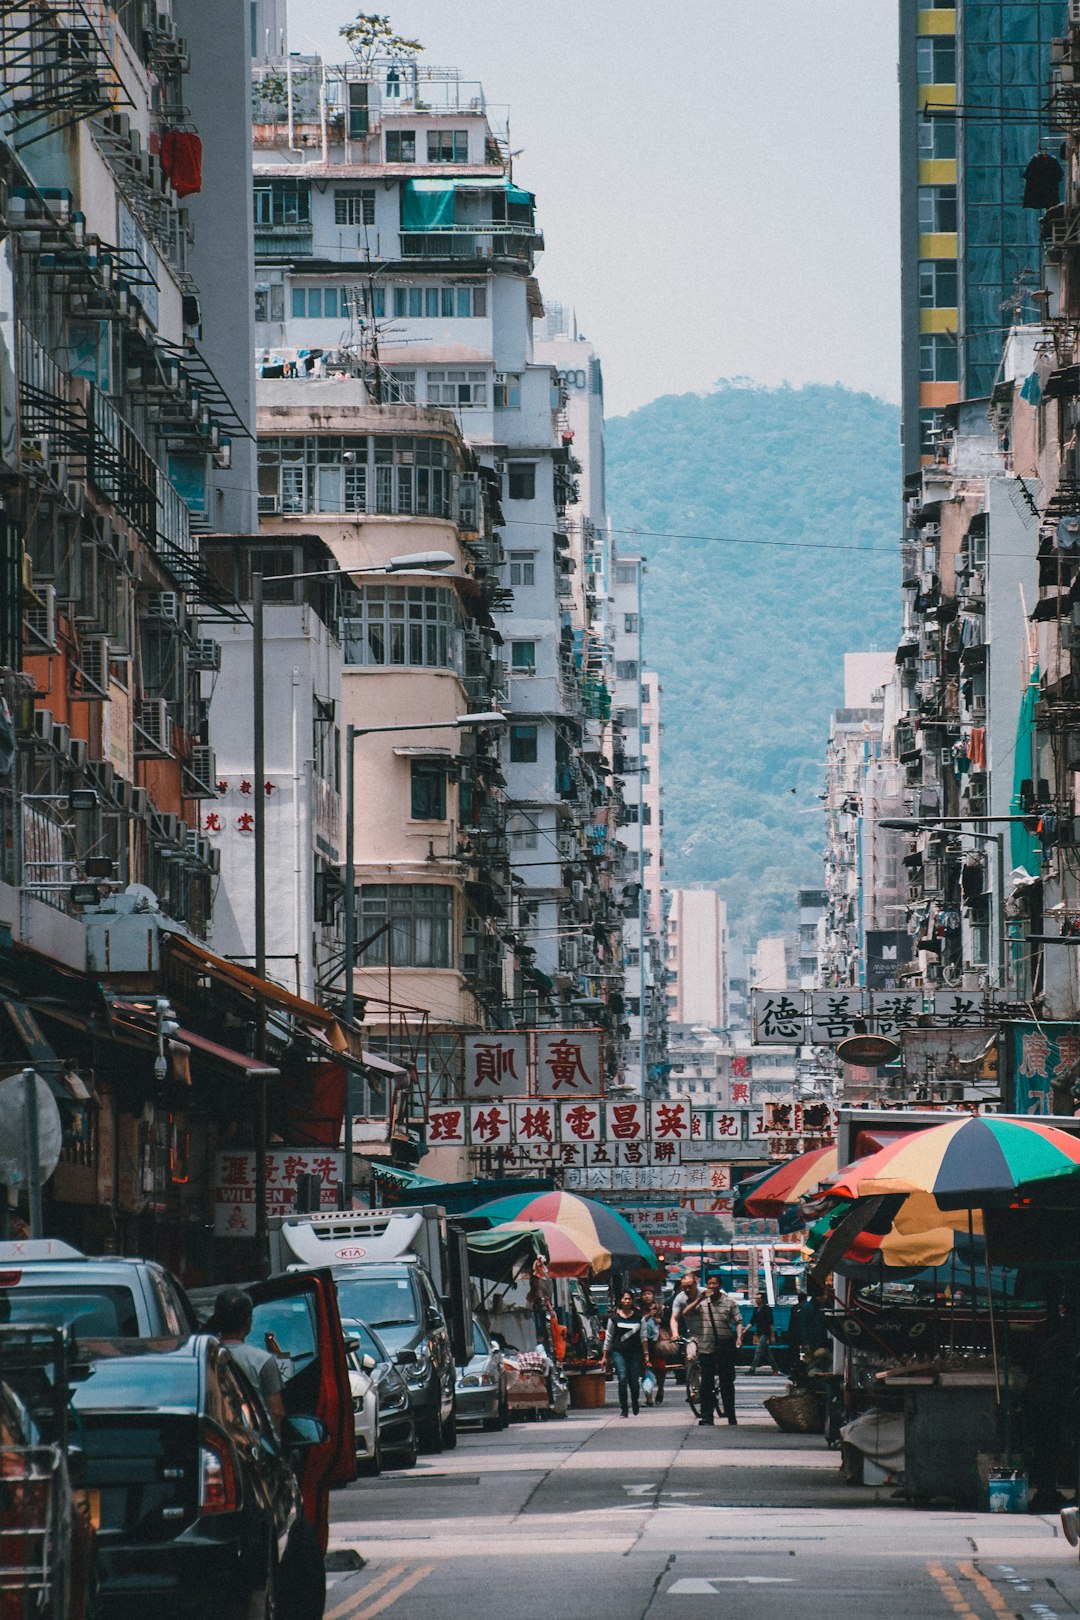 travelers stories about Town in Yau Ma Tei, Hong Kong